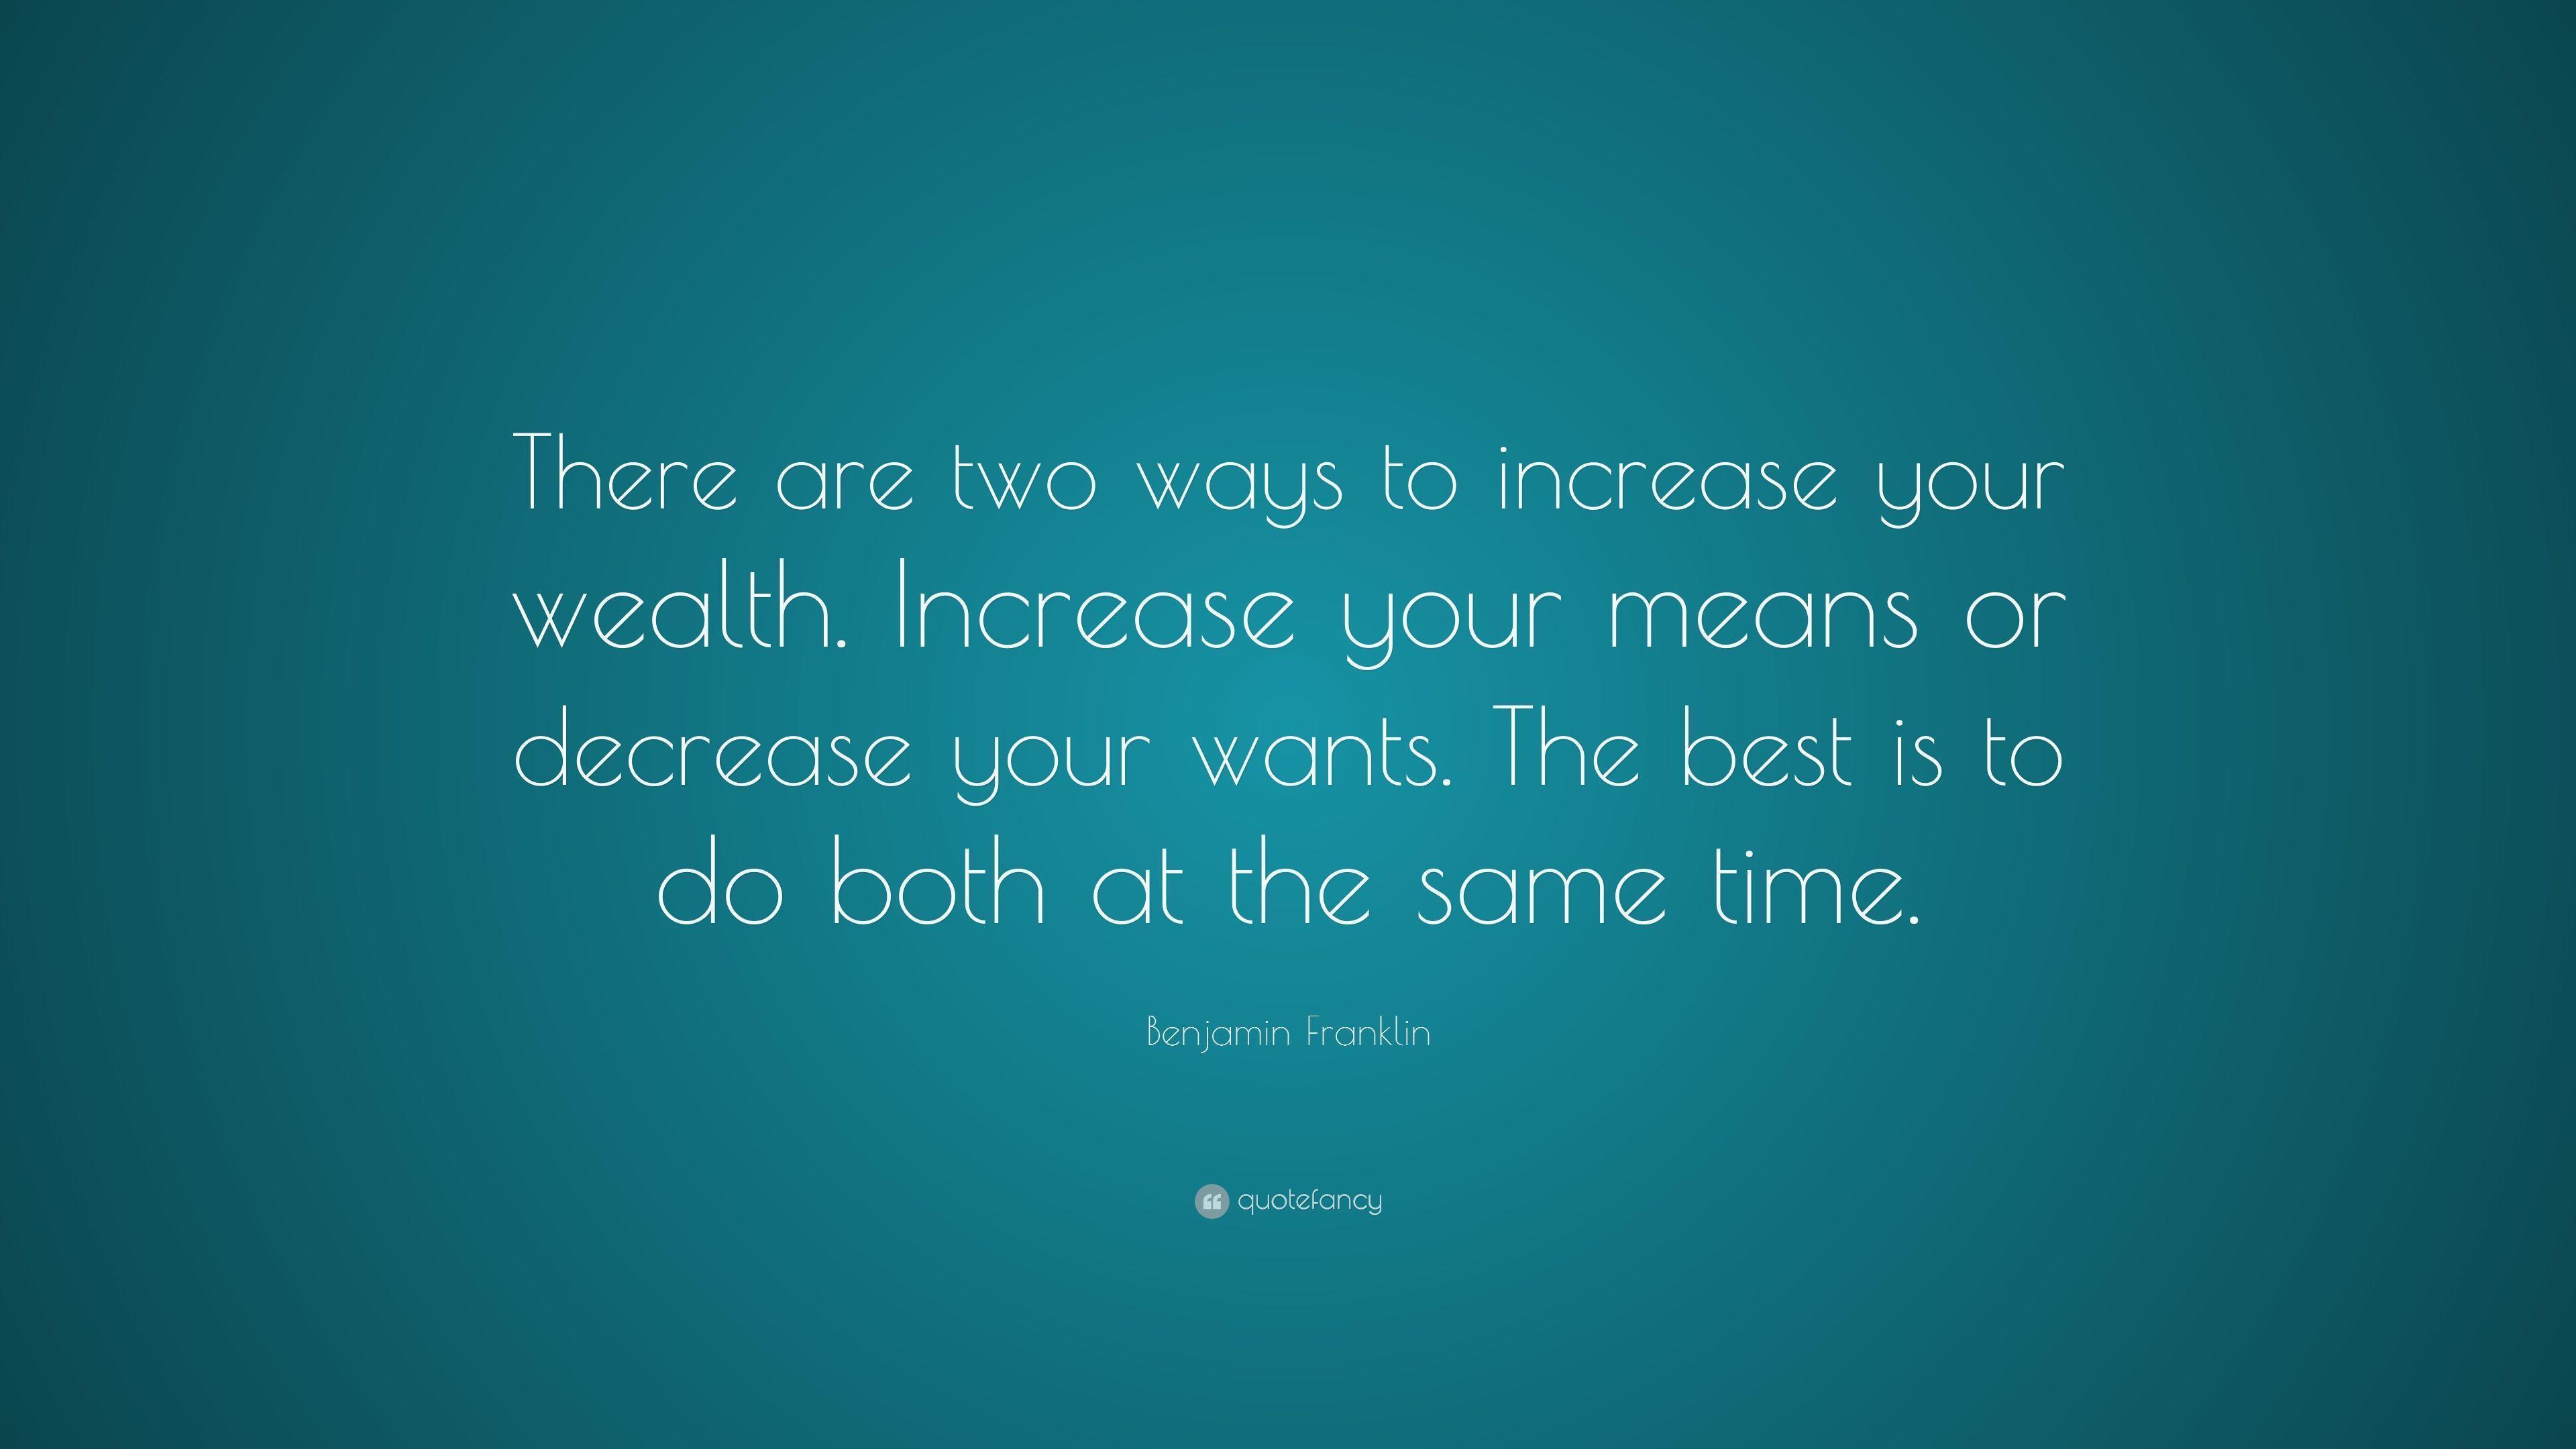 Benjamin Franklin Quote: “There are two ways to increase your